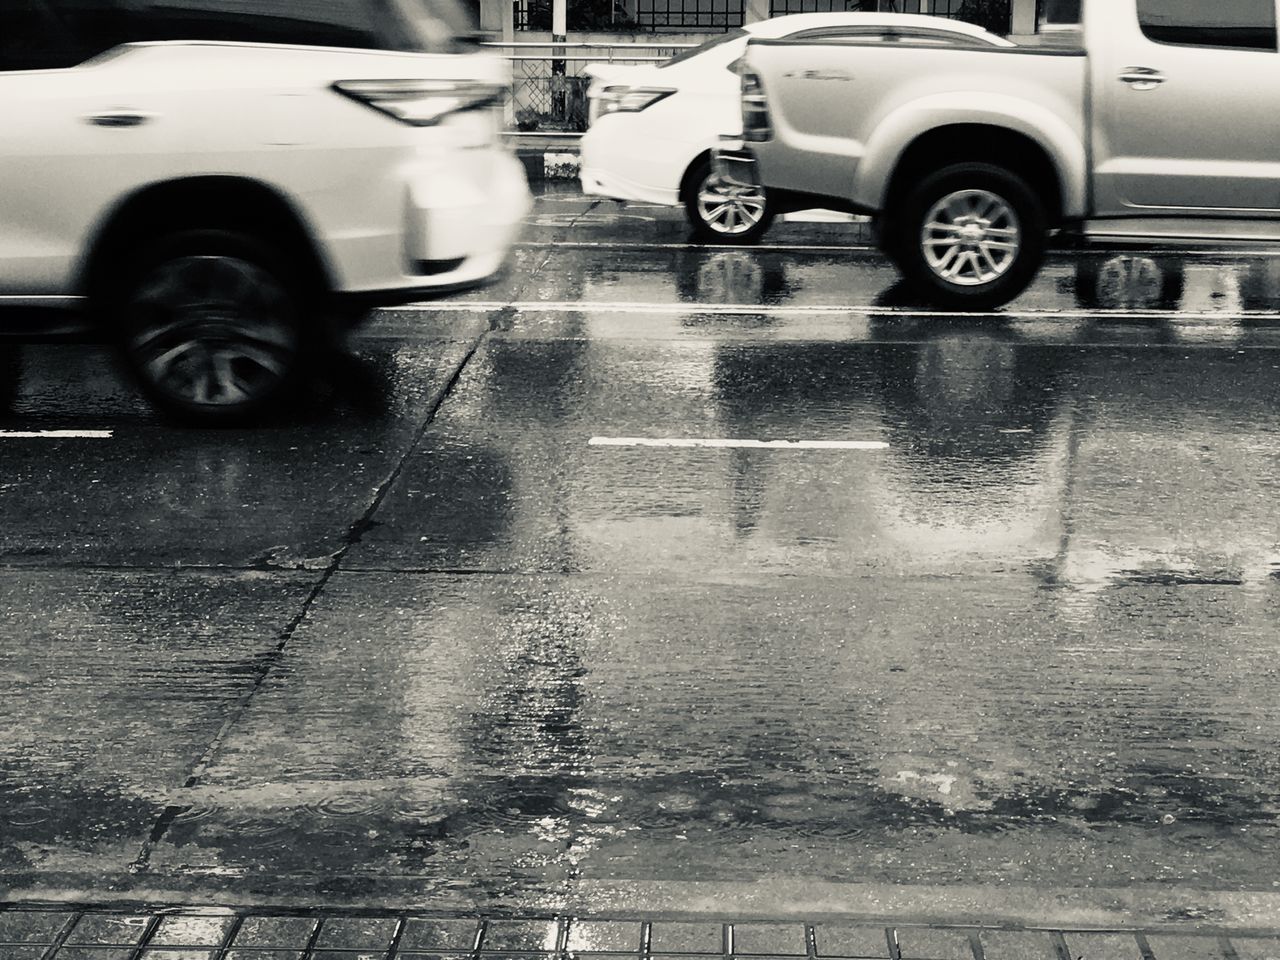 transportation, mode of transportation, motor vehicle, car, land vehicle, city, street, wet, black, rain, wheel, road, black and white, motion, day, monochrome, tire, architecture, vehicle, monochrome photography, white, outdoors, water, no people, automotive exterior, city street